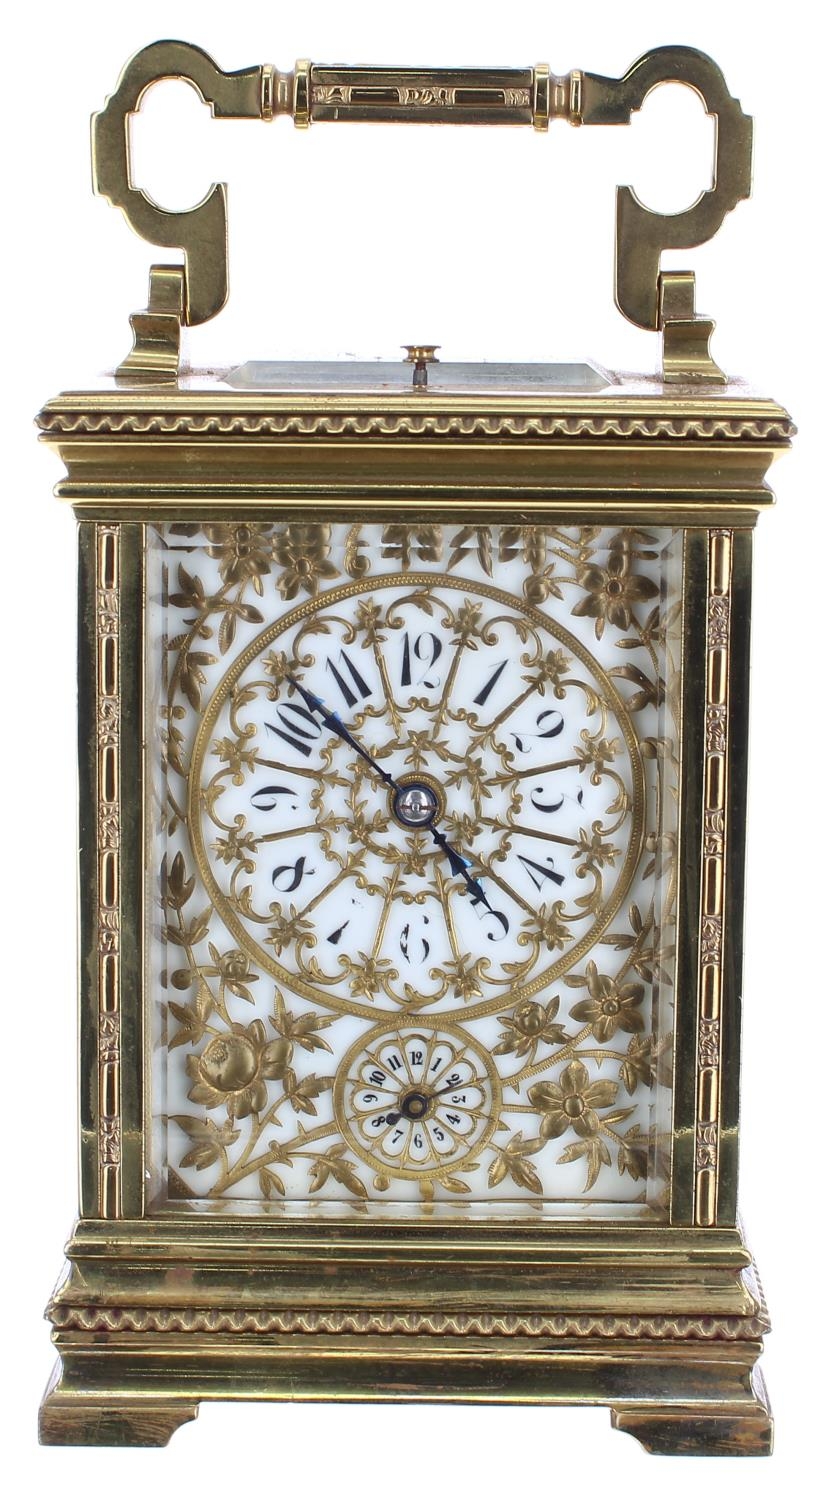 Good French repeater carriage clock with alarm, the movement stamped France no. 4526 and striking on - Image 2 of 5